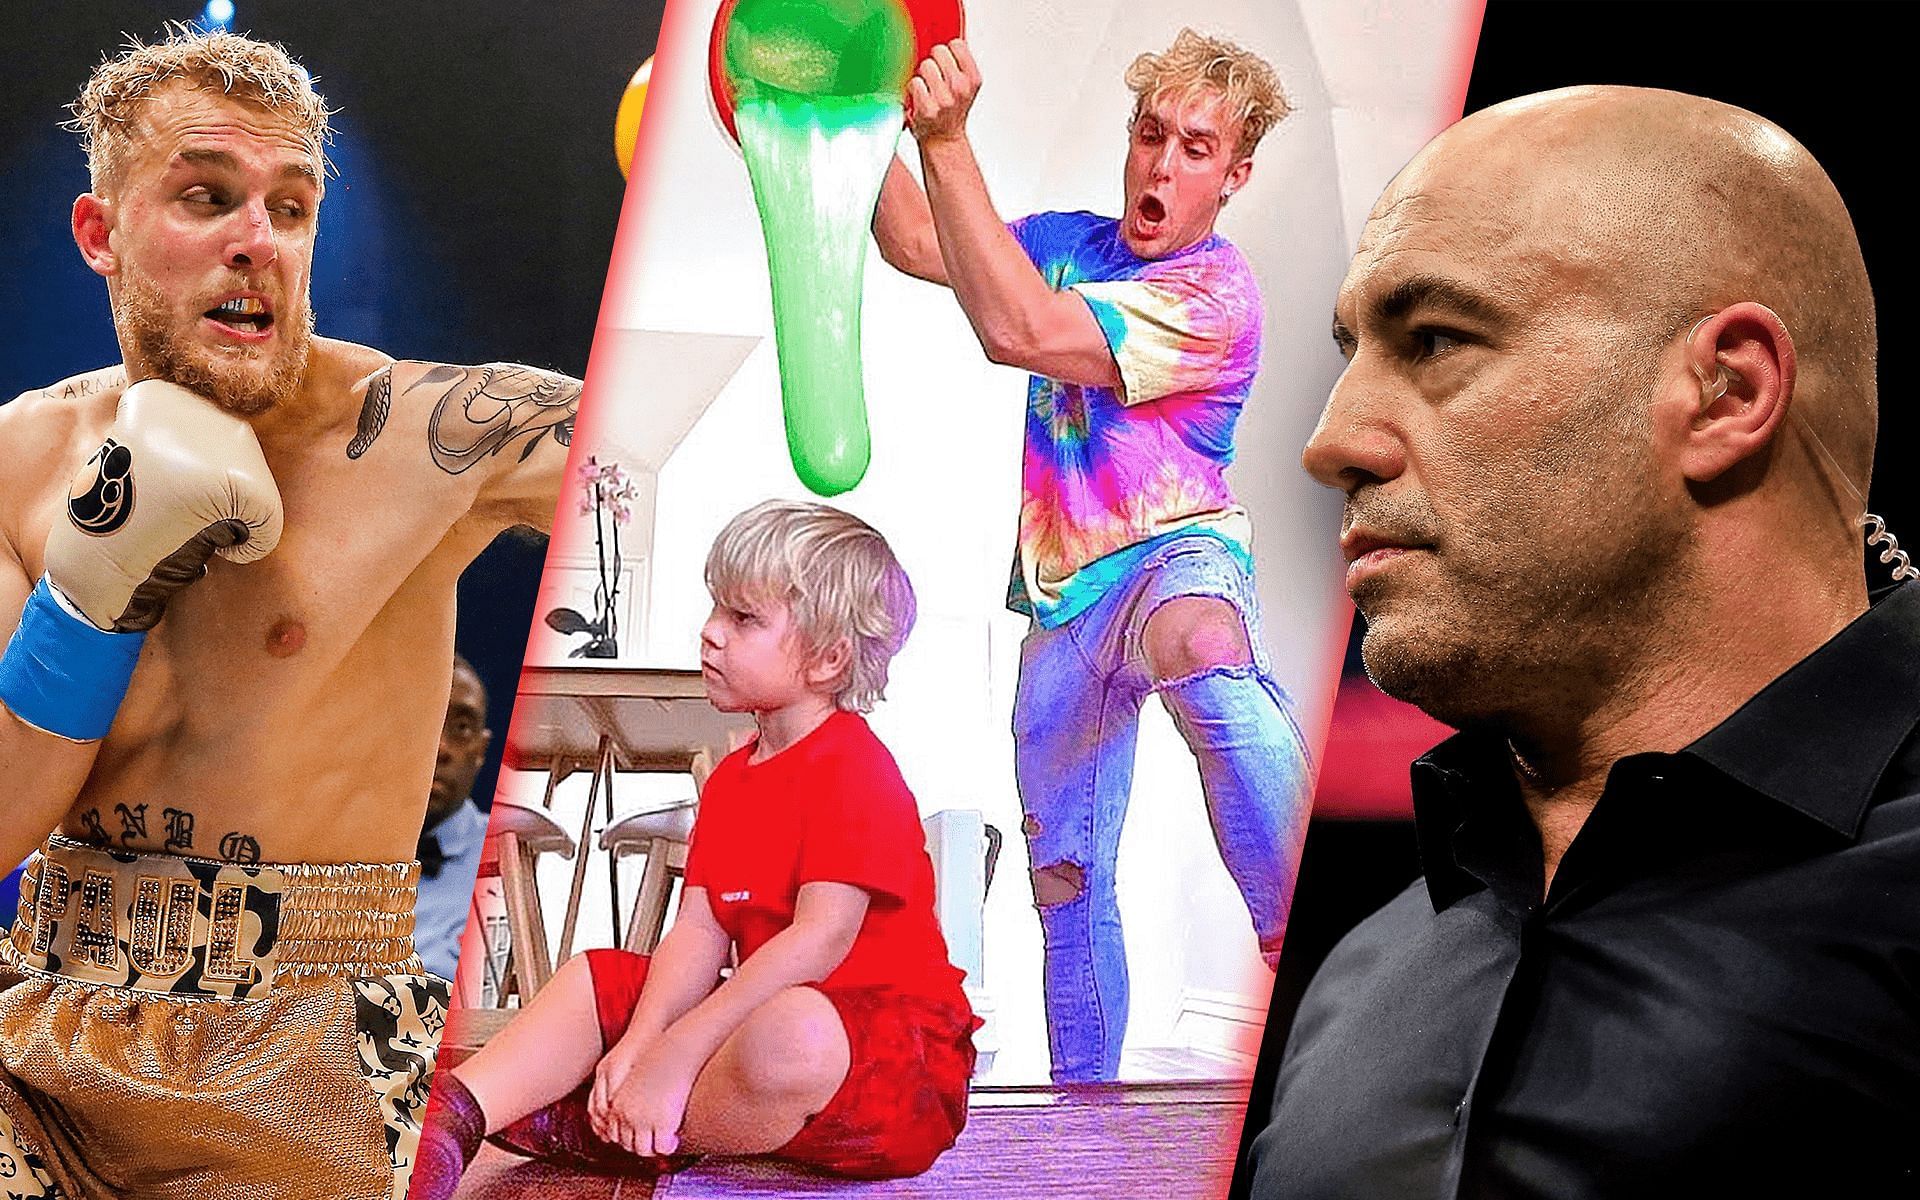 Jake Paul and Joe Rogan [Image in the middle courtesy - Jake Paul on YouTube; images on extreme left and right courtesy - Getty]